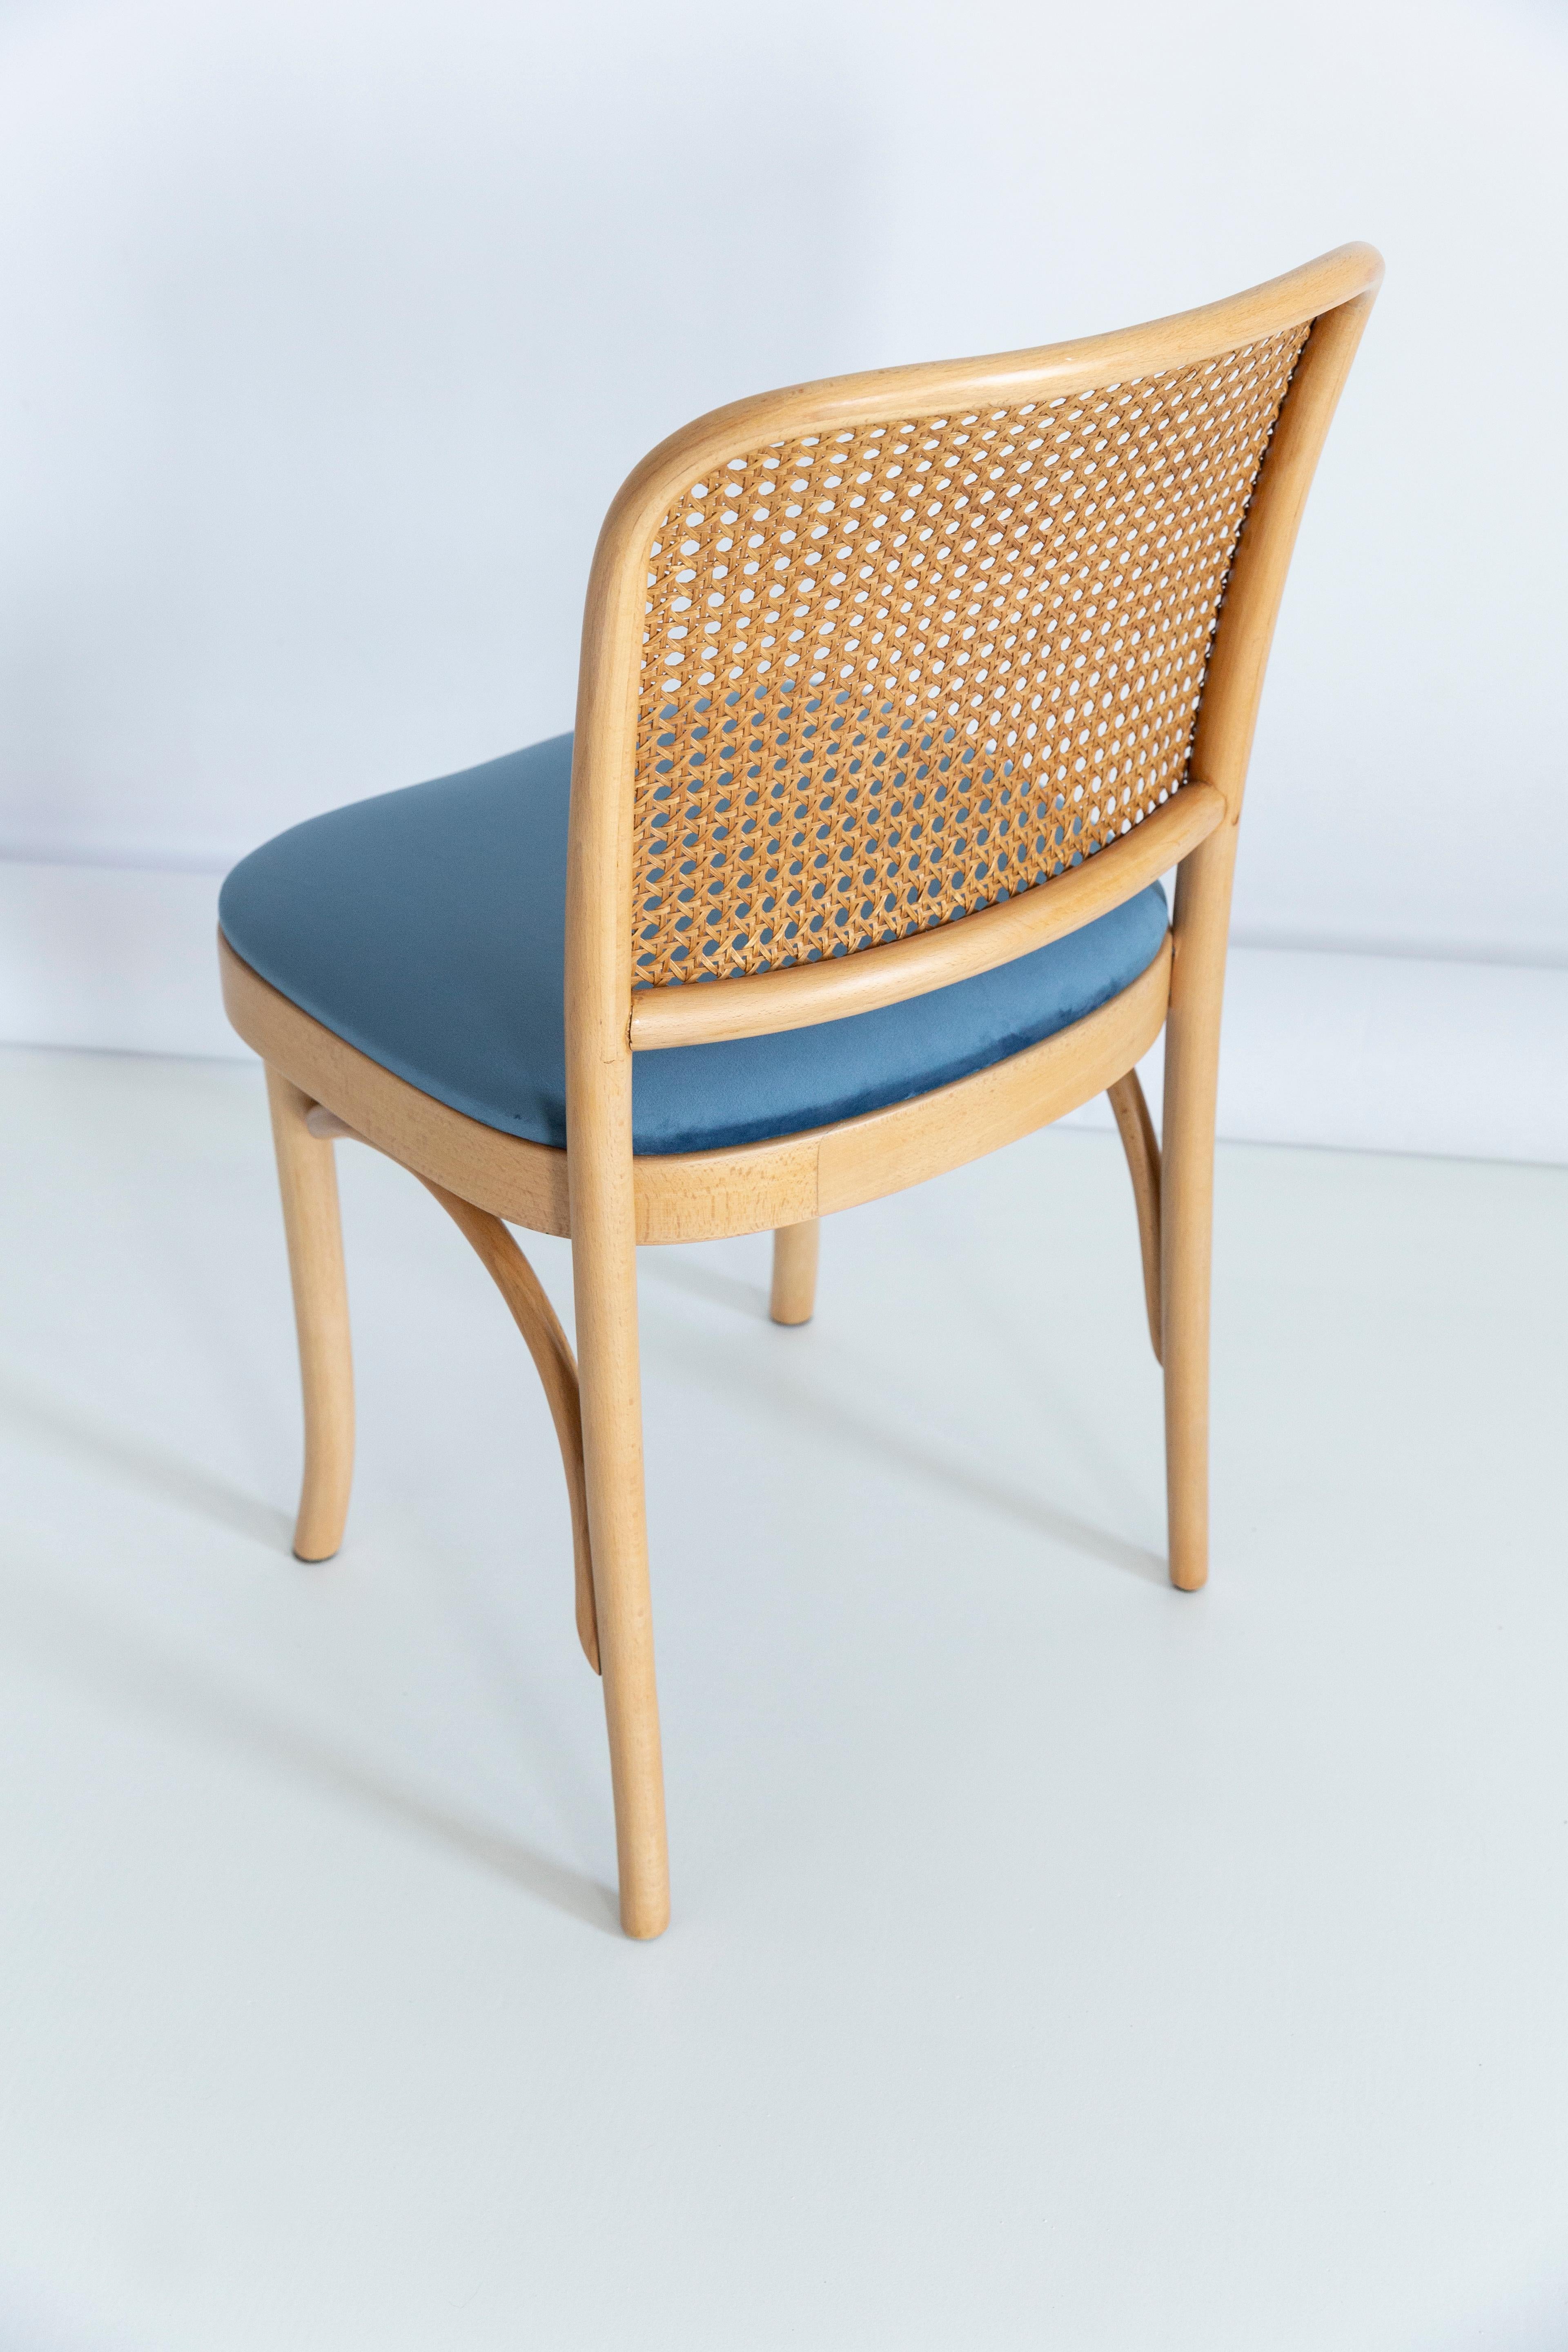 Set of Five Blue Velvet Thonet Wood Rattan Chairs, 1960s For Sale 11